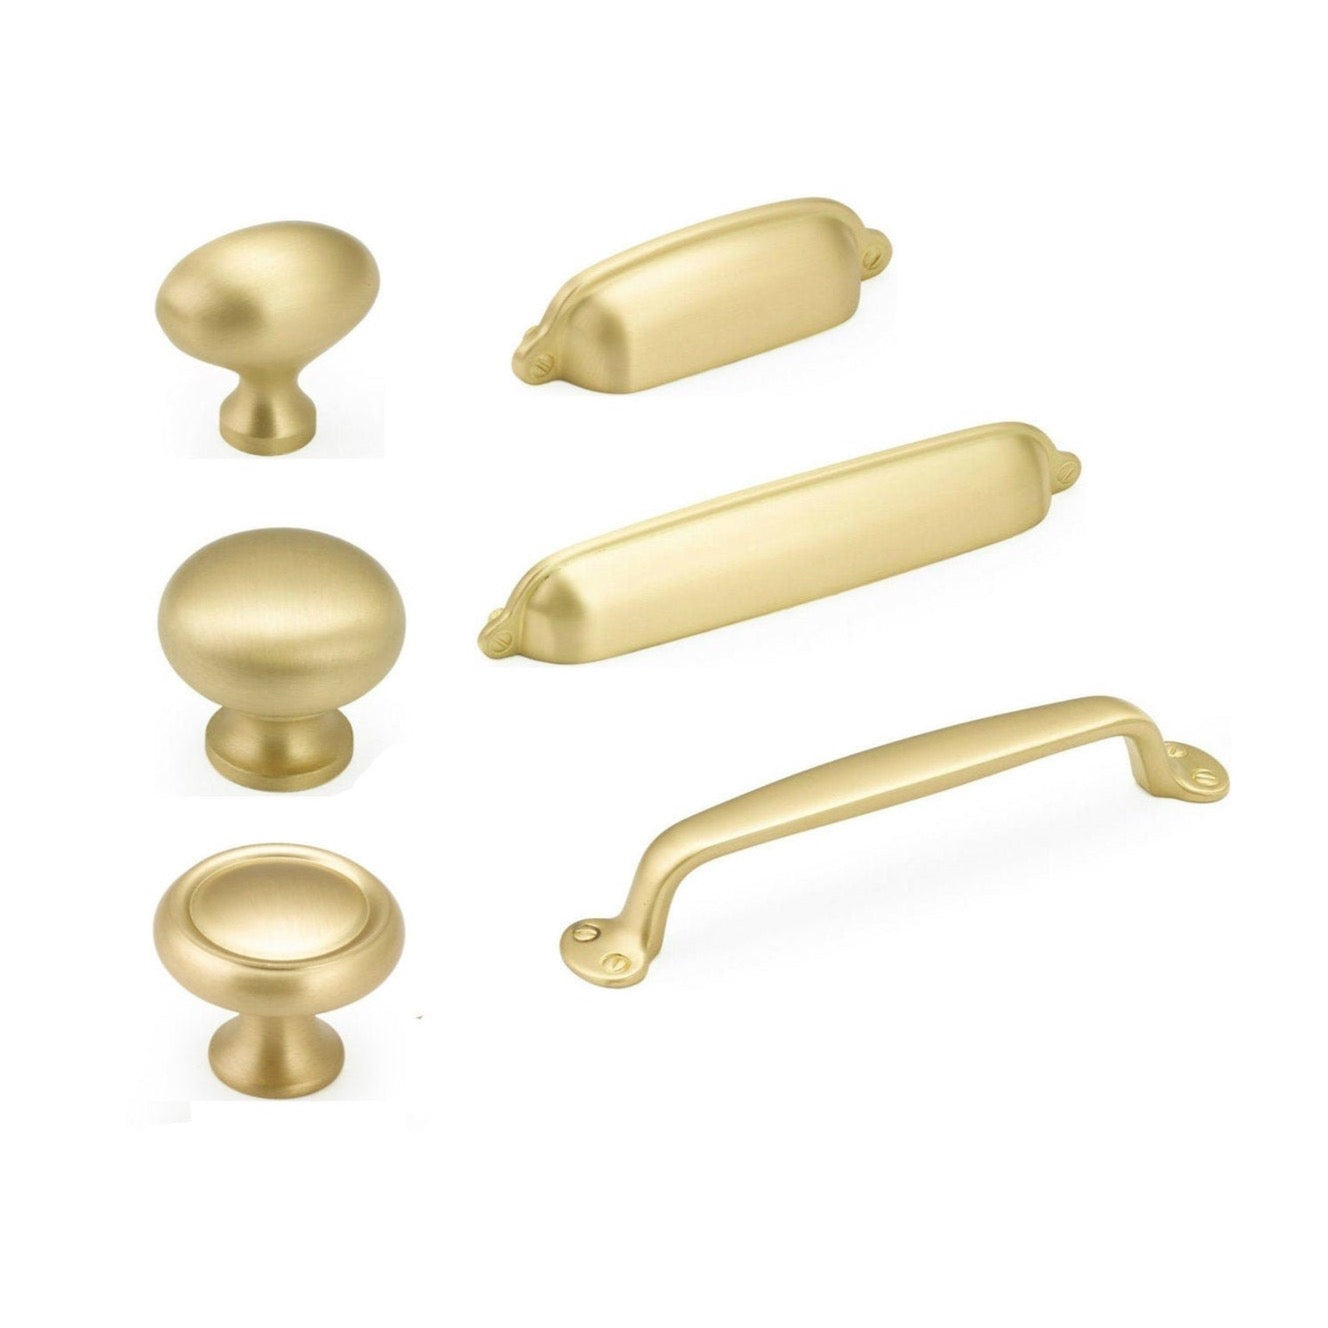 Brushed Satin Brass Kitchen Cupboard Handles Knobs Pulls Cup D Bow